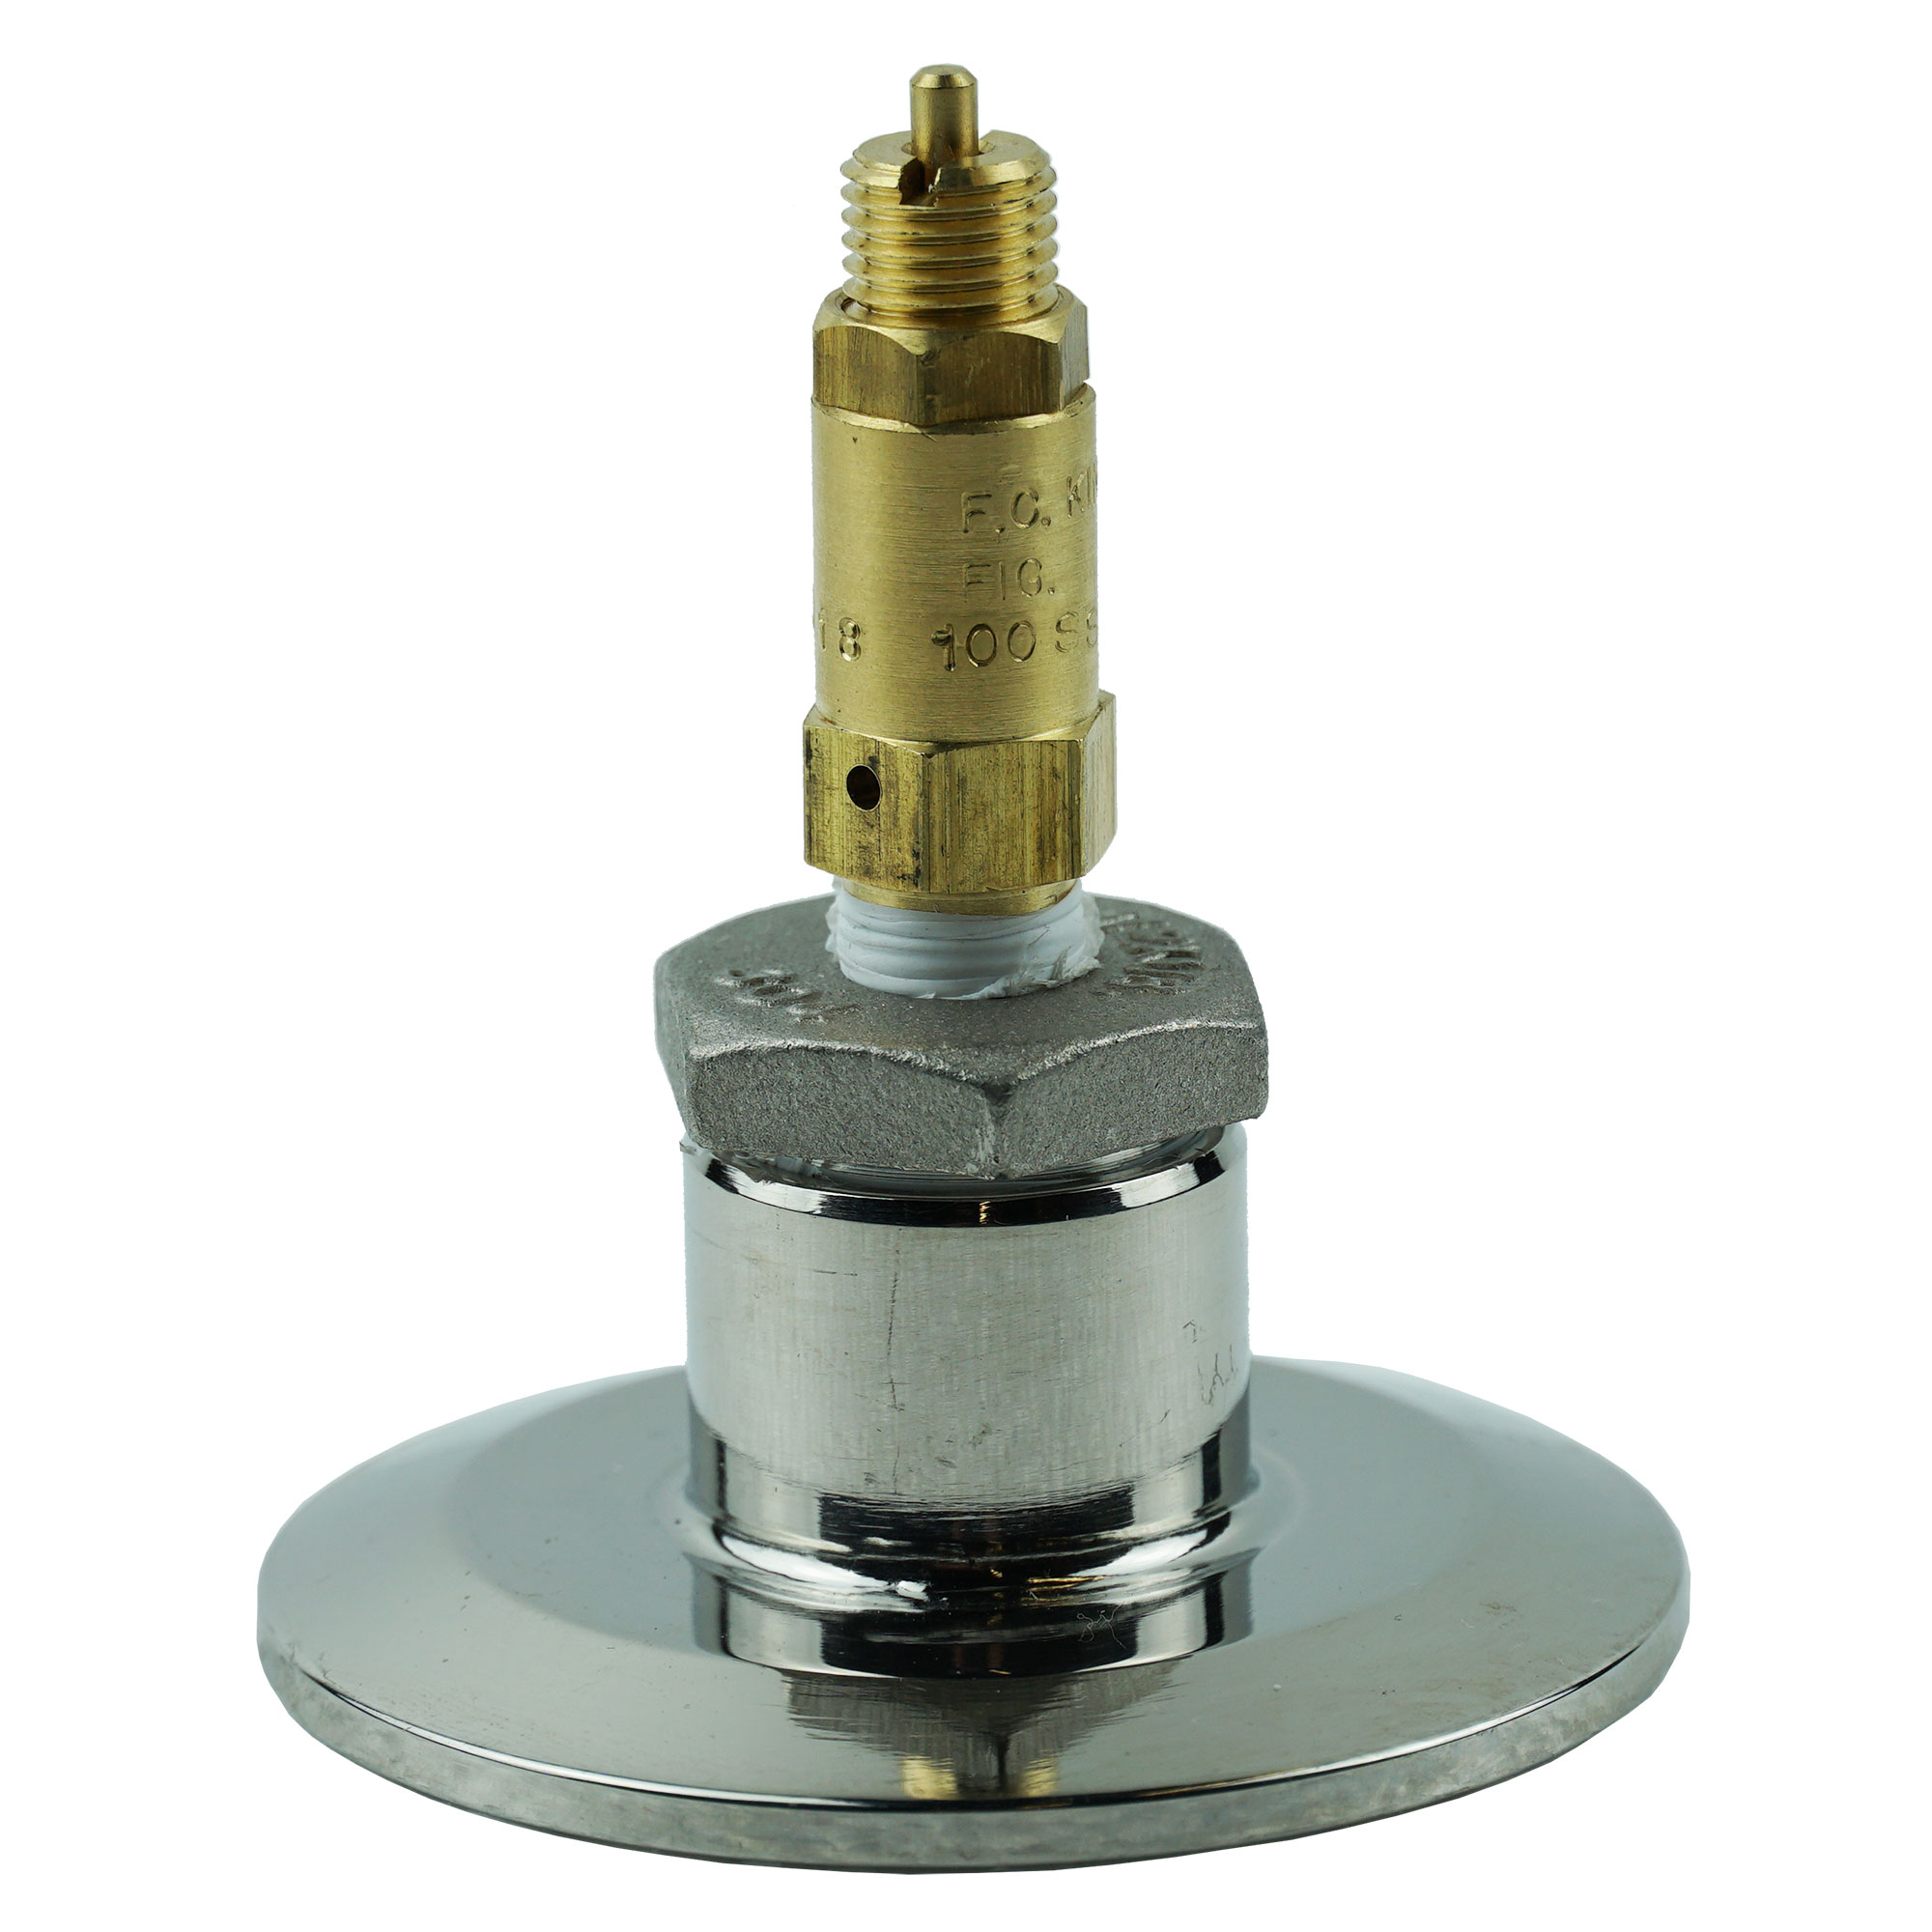 5 PSI safety valve with 2" x 1/2" Adapter